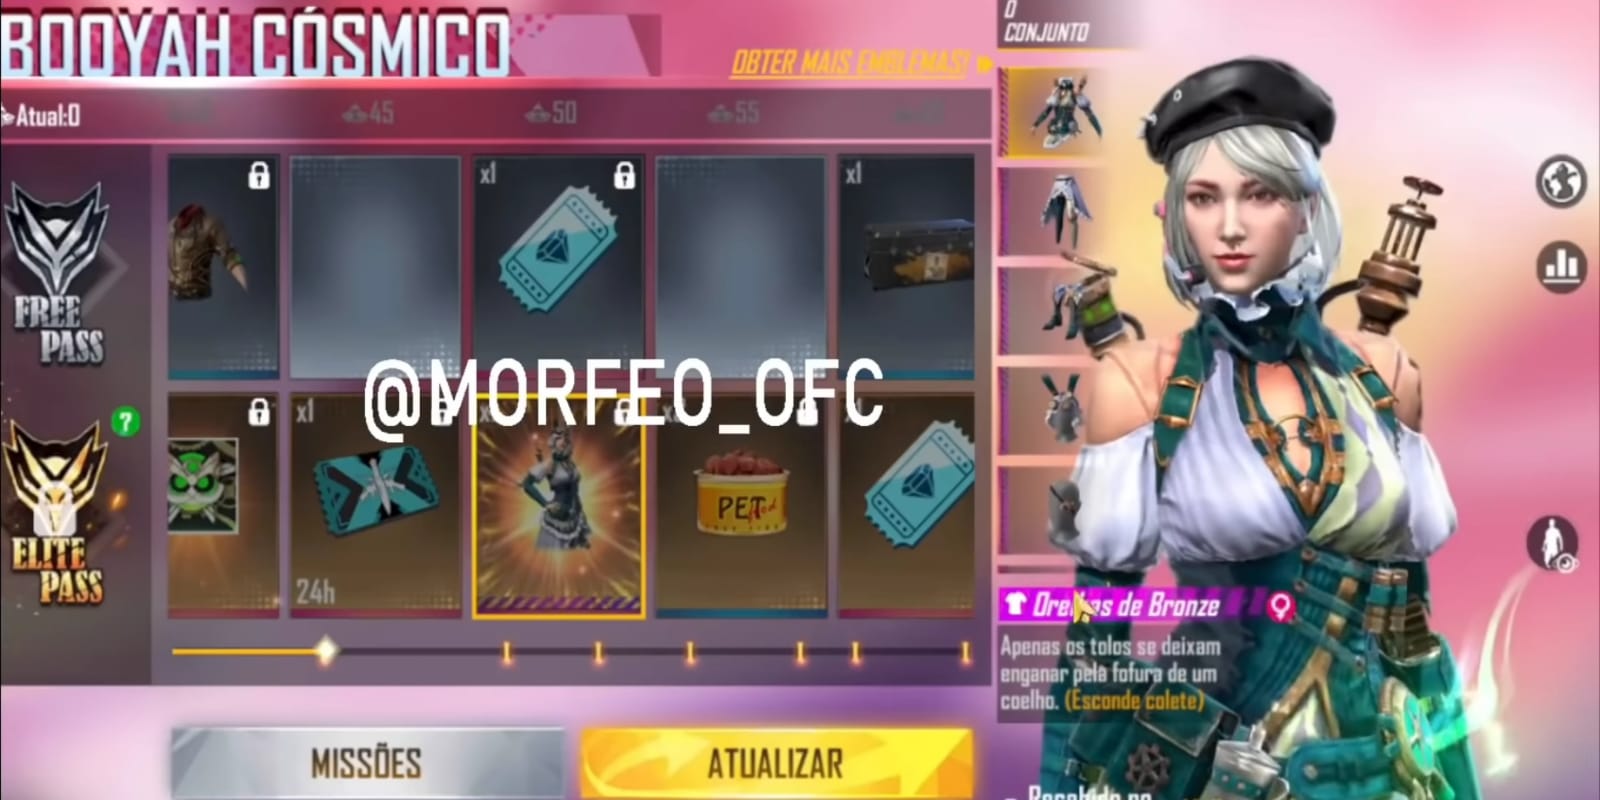 Garena Free Fire Season 46 Elite Pass Rewards: Check all the available items in the upcoming Free Fire Elite Pass March 2022